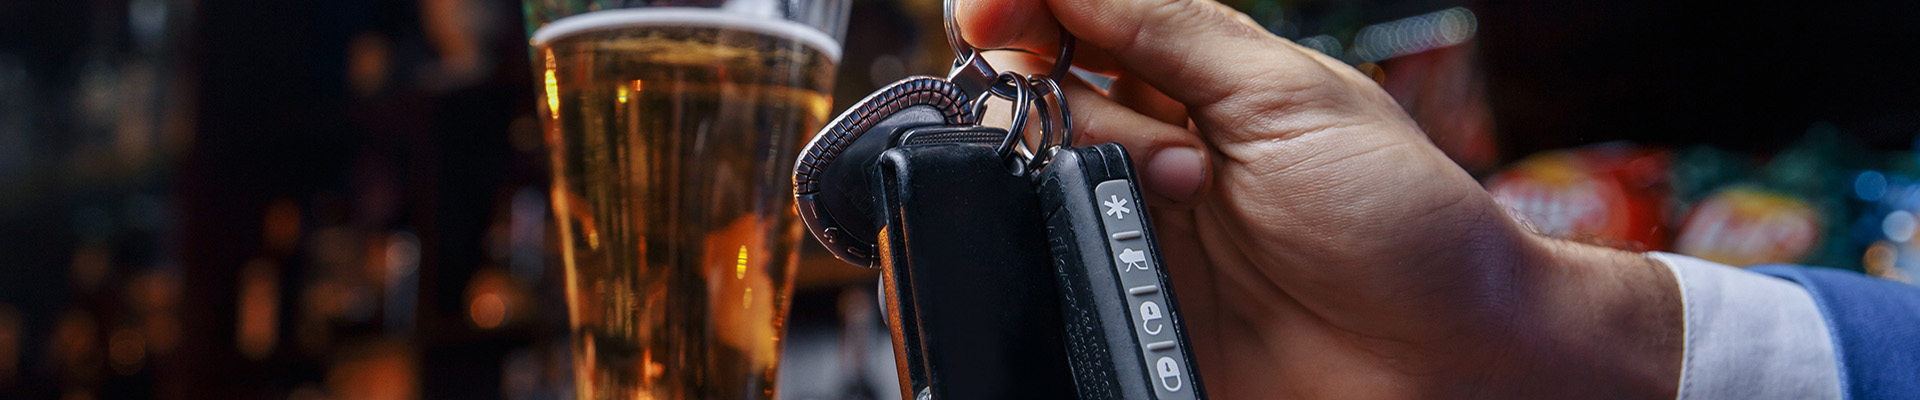 Keys in front of beer glass on a bar